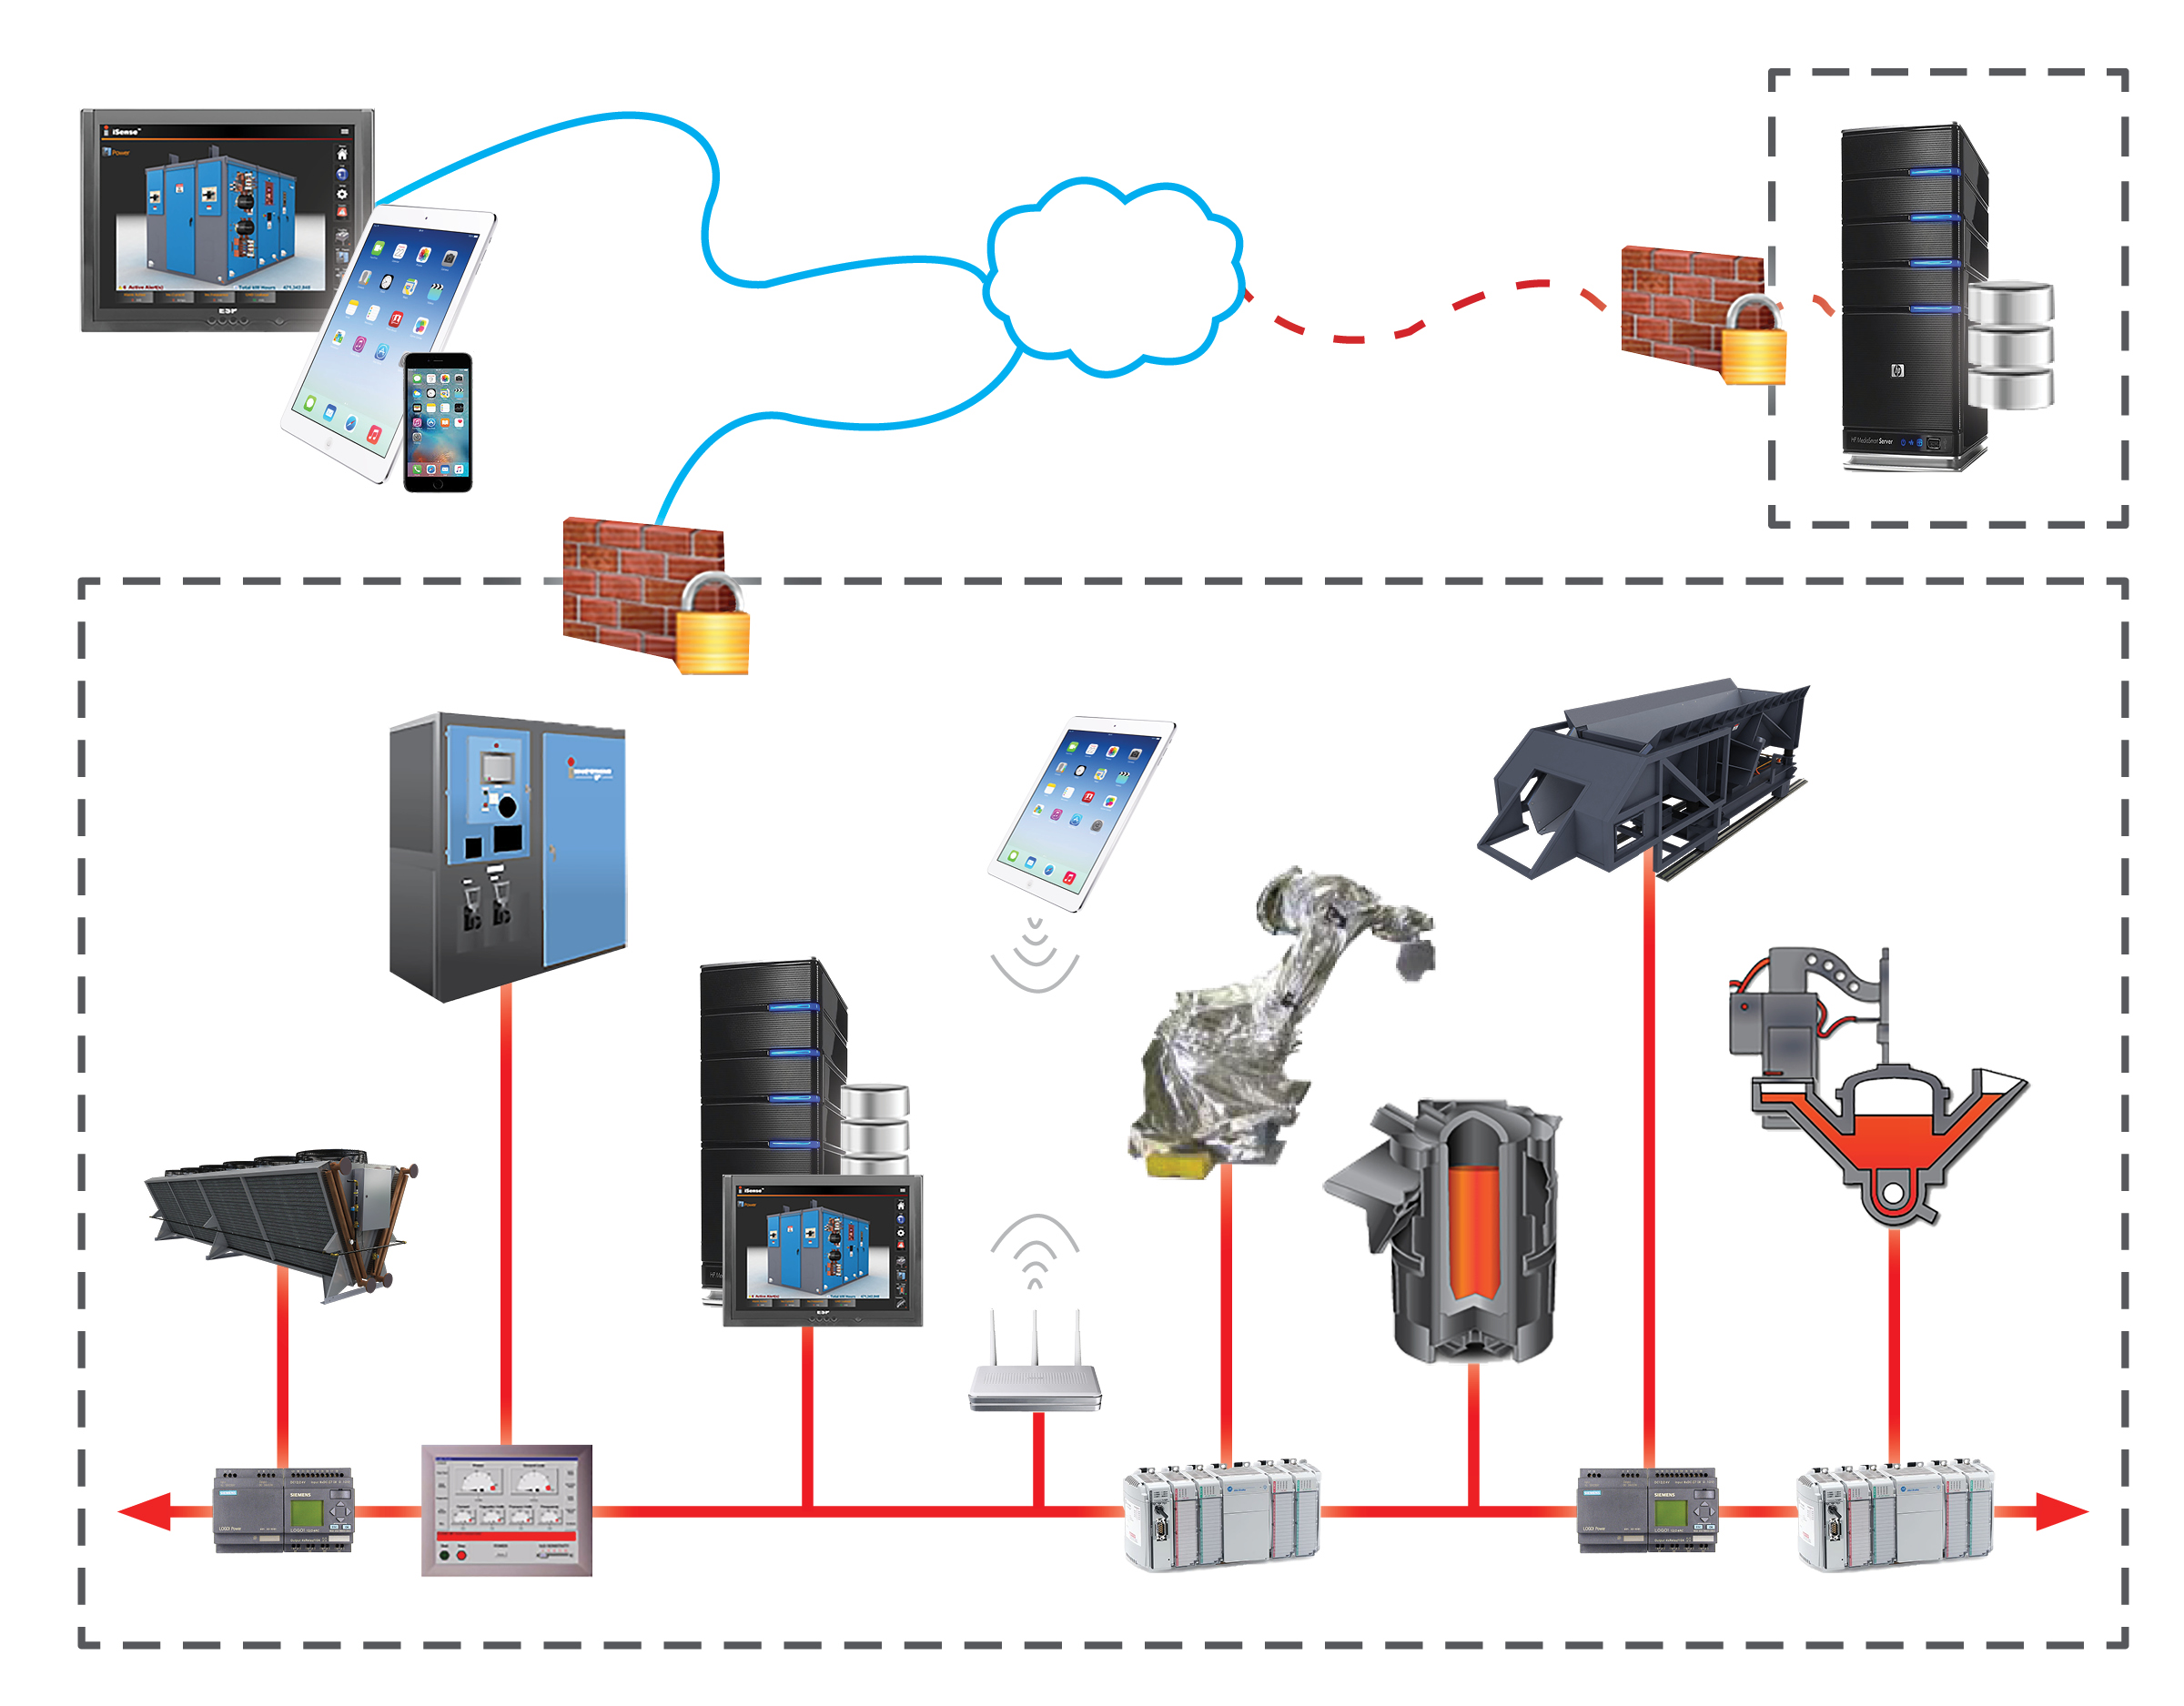 Image illustrating the topology of Inductotherm's Melt Shop Equipment Data Visualization System